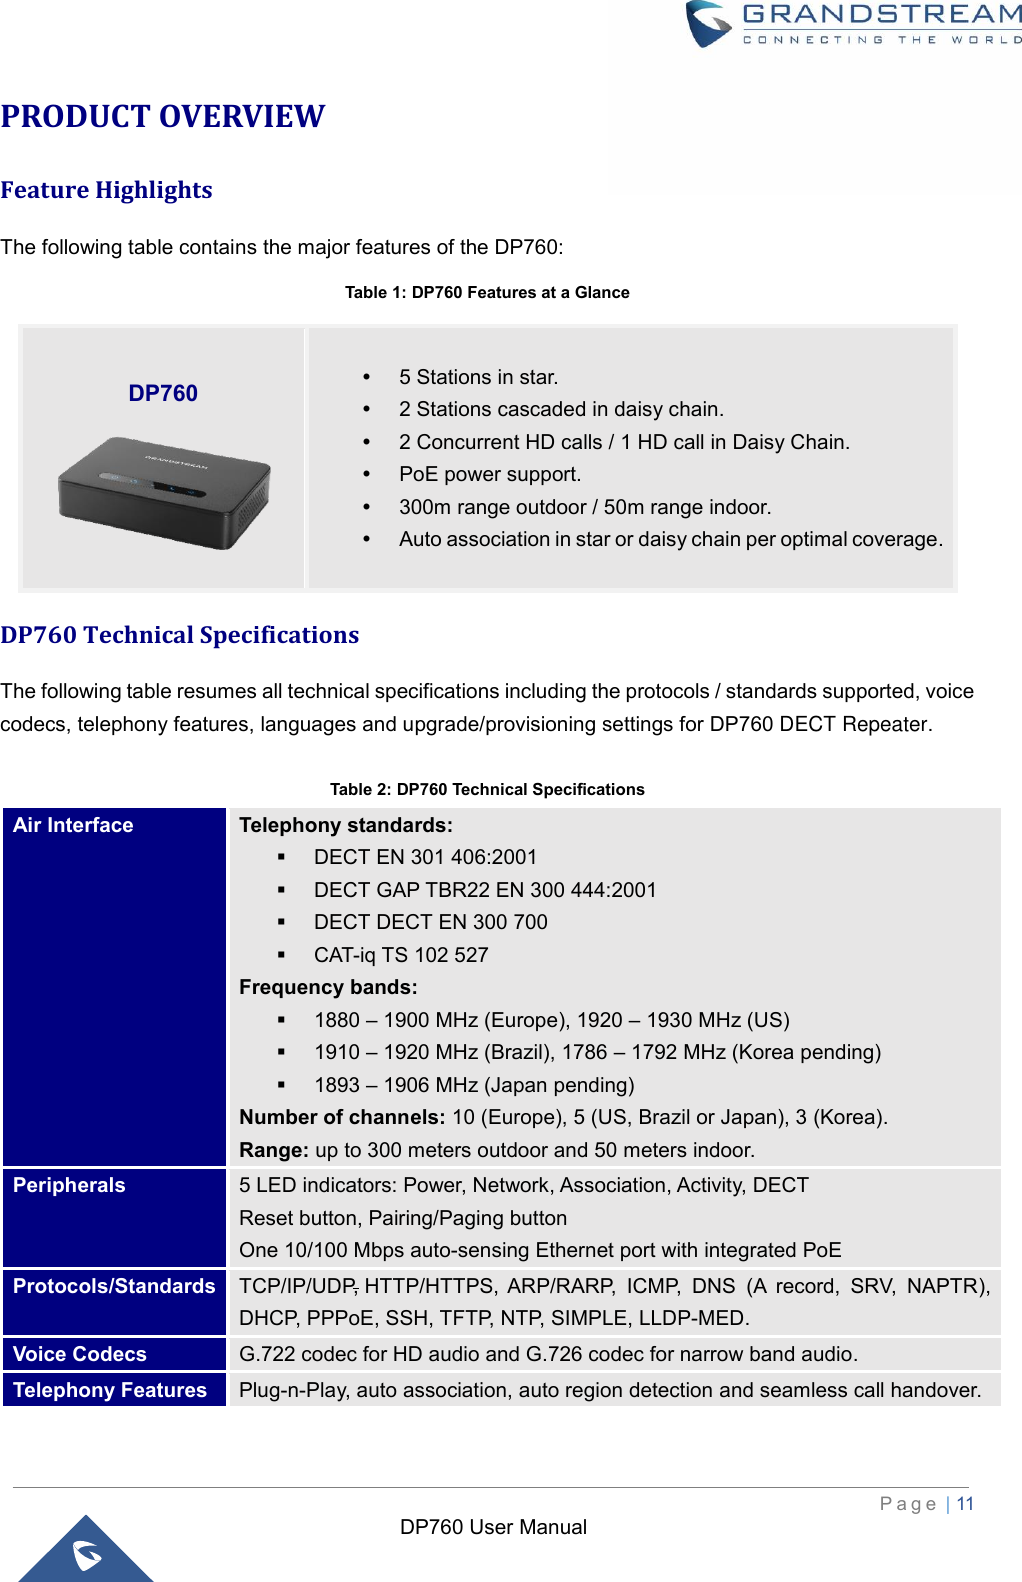  P a g e  | 11   DP760 User Manual PRODUCT OVERVIEW Feature Highlights The following table contains the major features of the DP760: Table 1: DP760 Features at a Glance DP760 Technical Specifications The following table resumes all technical specifications including the protocols / standards supported, voice codecs, telephony features, languages and upgrade/provisioning settings for DP760 DECT Repeater.  Table 2: DP760 Technical Specifications Air Interface Telephony standards:   DECT EN 301 406:2001  DECT GAP TBR22 EN 300 444:2001  DECT DECT EN 300 700  CAT-iq TS 102 527 Frequency bands:  1880 – 1900 MHz (Europe), 1920 – 1930 MHz (US)  1910 – 1920 MHz (Brazil), 1786 – 1792 MHz (Korea pending)  1893 – 1906 MHz (Japan pending) Number of channels: 10 (Europe), 5 (US, Brazil or Japan), 3 (Korea). Range: up to 300 meters outdoor and 50 meters indoor. Peripherals 5 LED indicators: Power, Network, Association, Activity, DECT Reset button, Pairing/Paging button One 10/100 Mbps auto-sensing Ethernet port with integrated PoE Protocols/Standards TCP/IP/UDP, HTTP/HTTPS,  ARP/RARP,  ICMP,  DNS  (A  record,  SRV,  NAPTR), DHCP, PPPoE, SSH, TFTP, NTP, SIMPLE, LLDP-MED. Voice Codecs G.722 codec for HD audio and G.726 codec for narrow band audio. Telephony Features Plug-n-Play, auto association, auto region detection and seamless call handover.  DP760    5 Stations in star.  2 Stations cascaded in daisy chain.  2 Concurrent HD calls / 1 HD call in Daisy Chain.  PoE power support.  300m range outdoor / 50m range indoor.  Auto association in star or daisy chain per optimal coverage.  